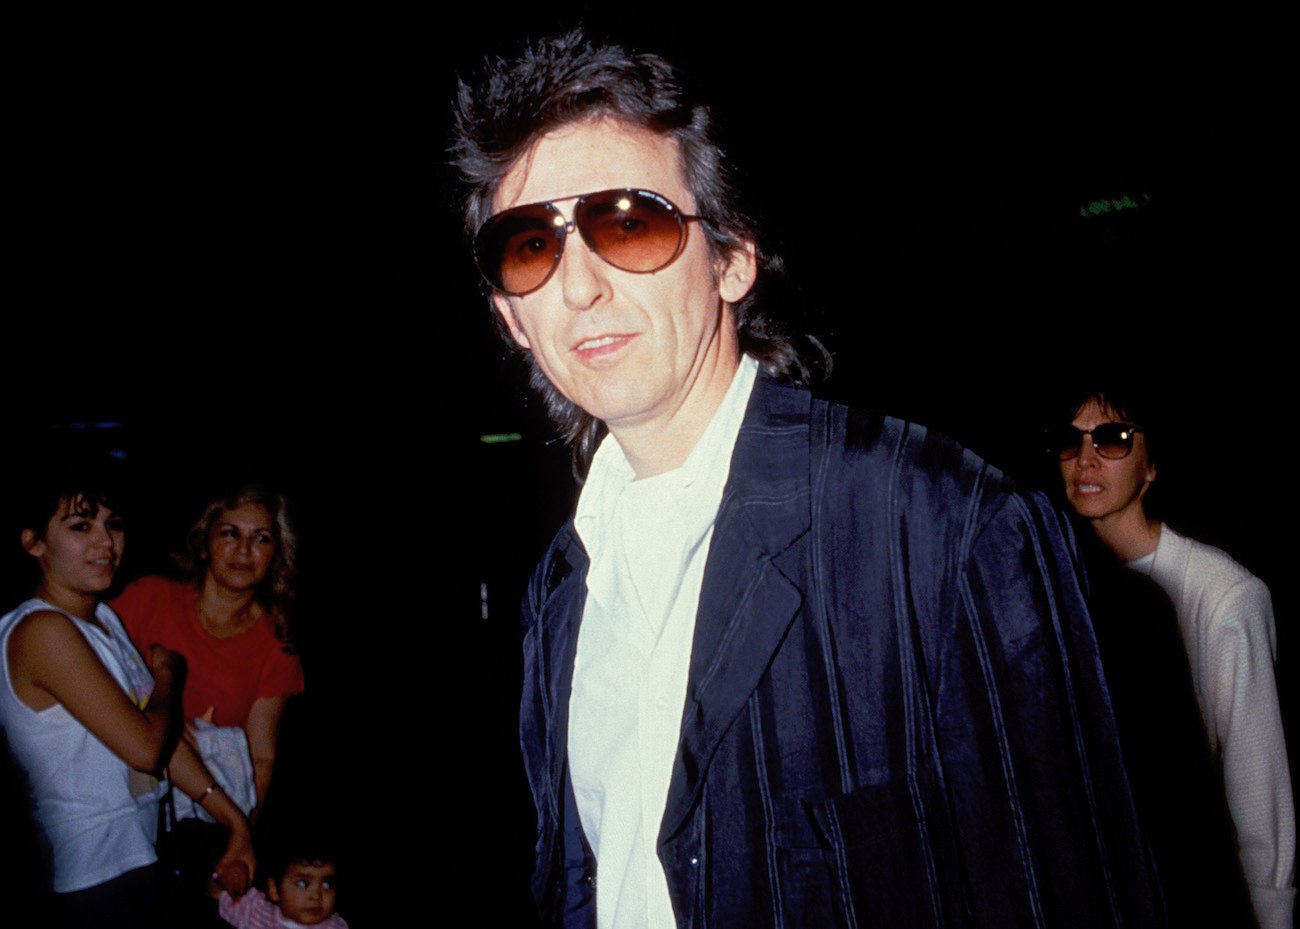 George Harrison at LAX Airport in 1988.